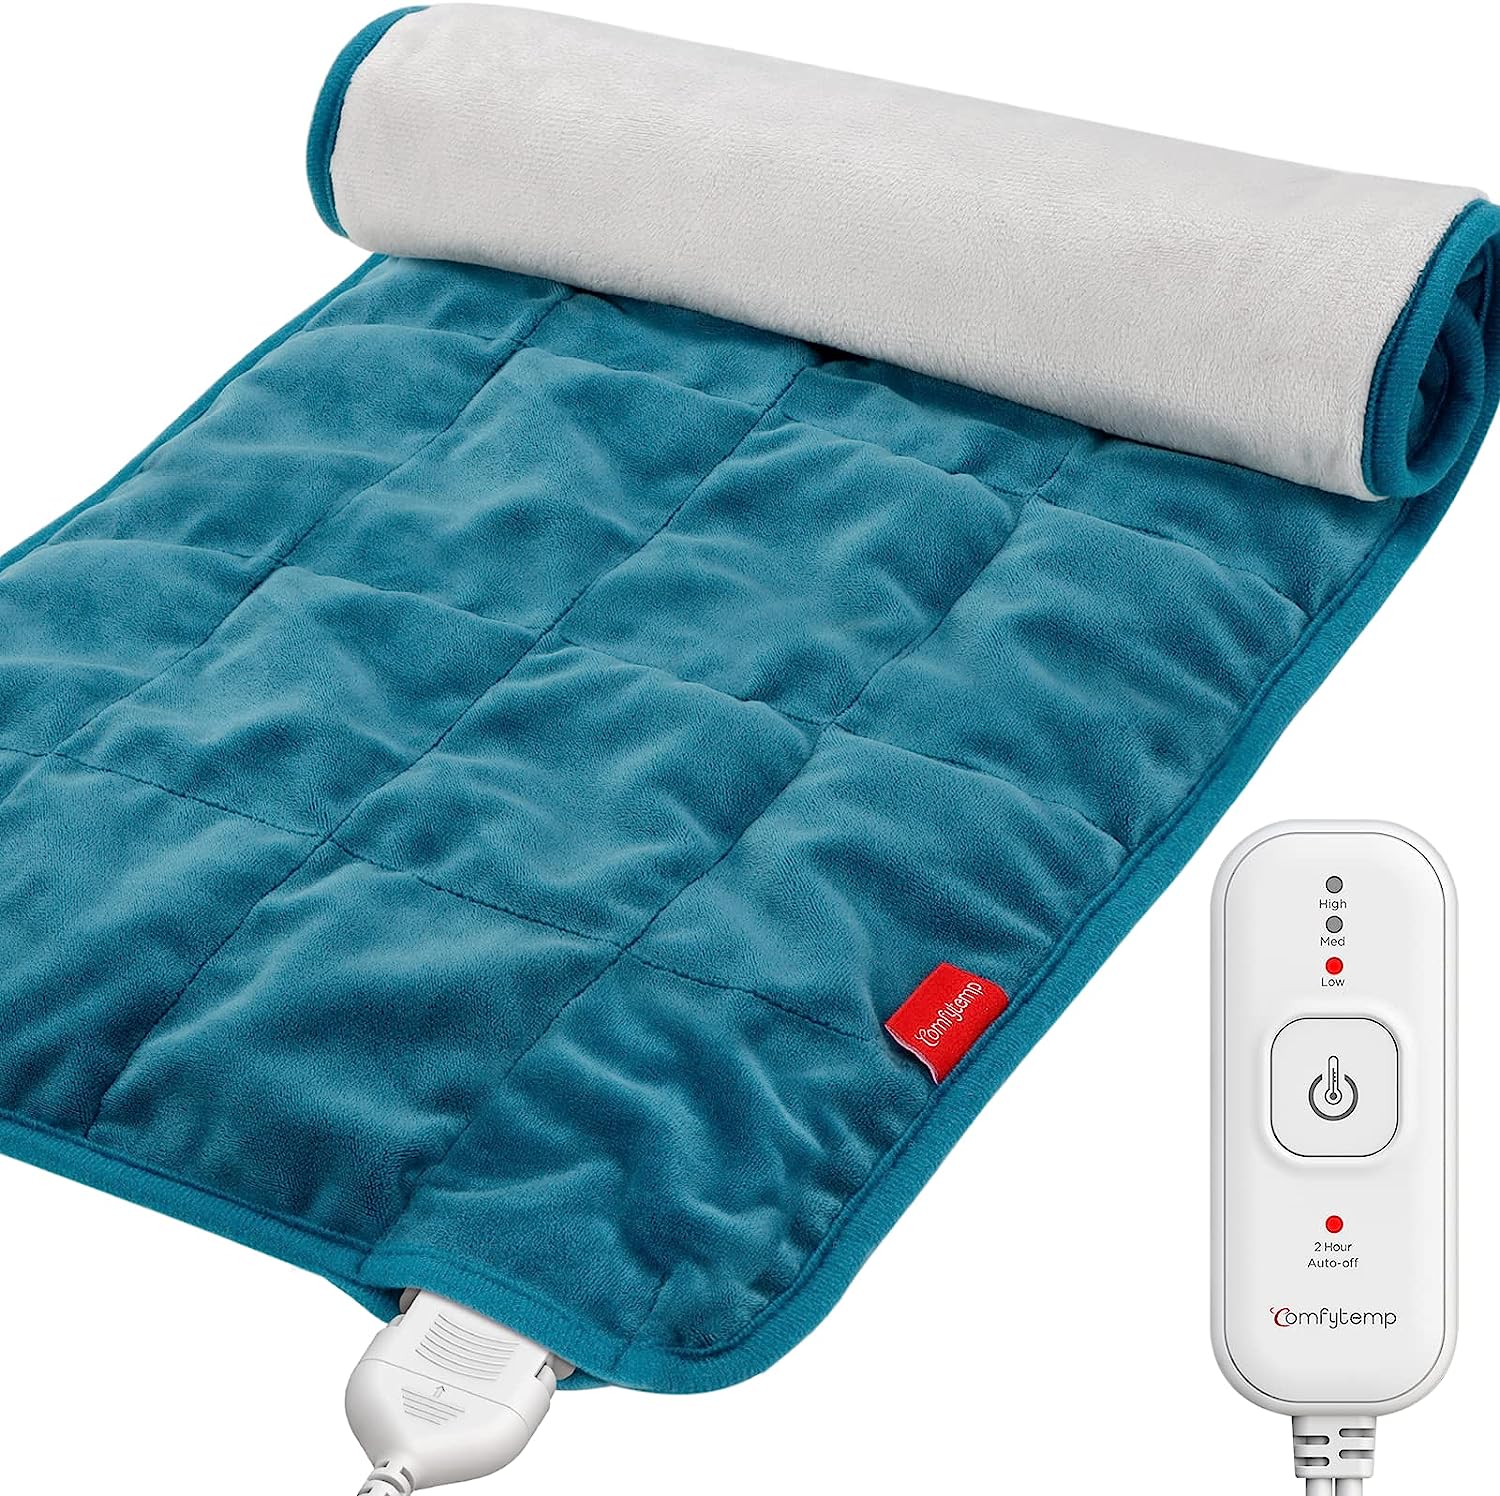 Review of Comfytemp Full Weighted Heating Pad for Back Pain & Cramps Relief, 2.2lb Large Electric Heating Pad for Neck and Shoulders, 12x24